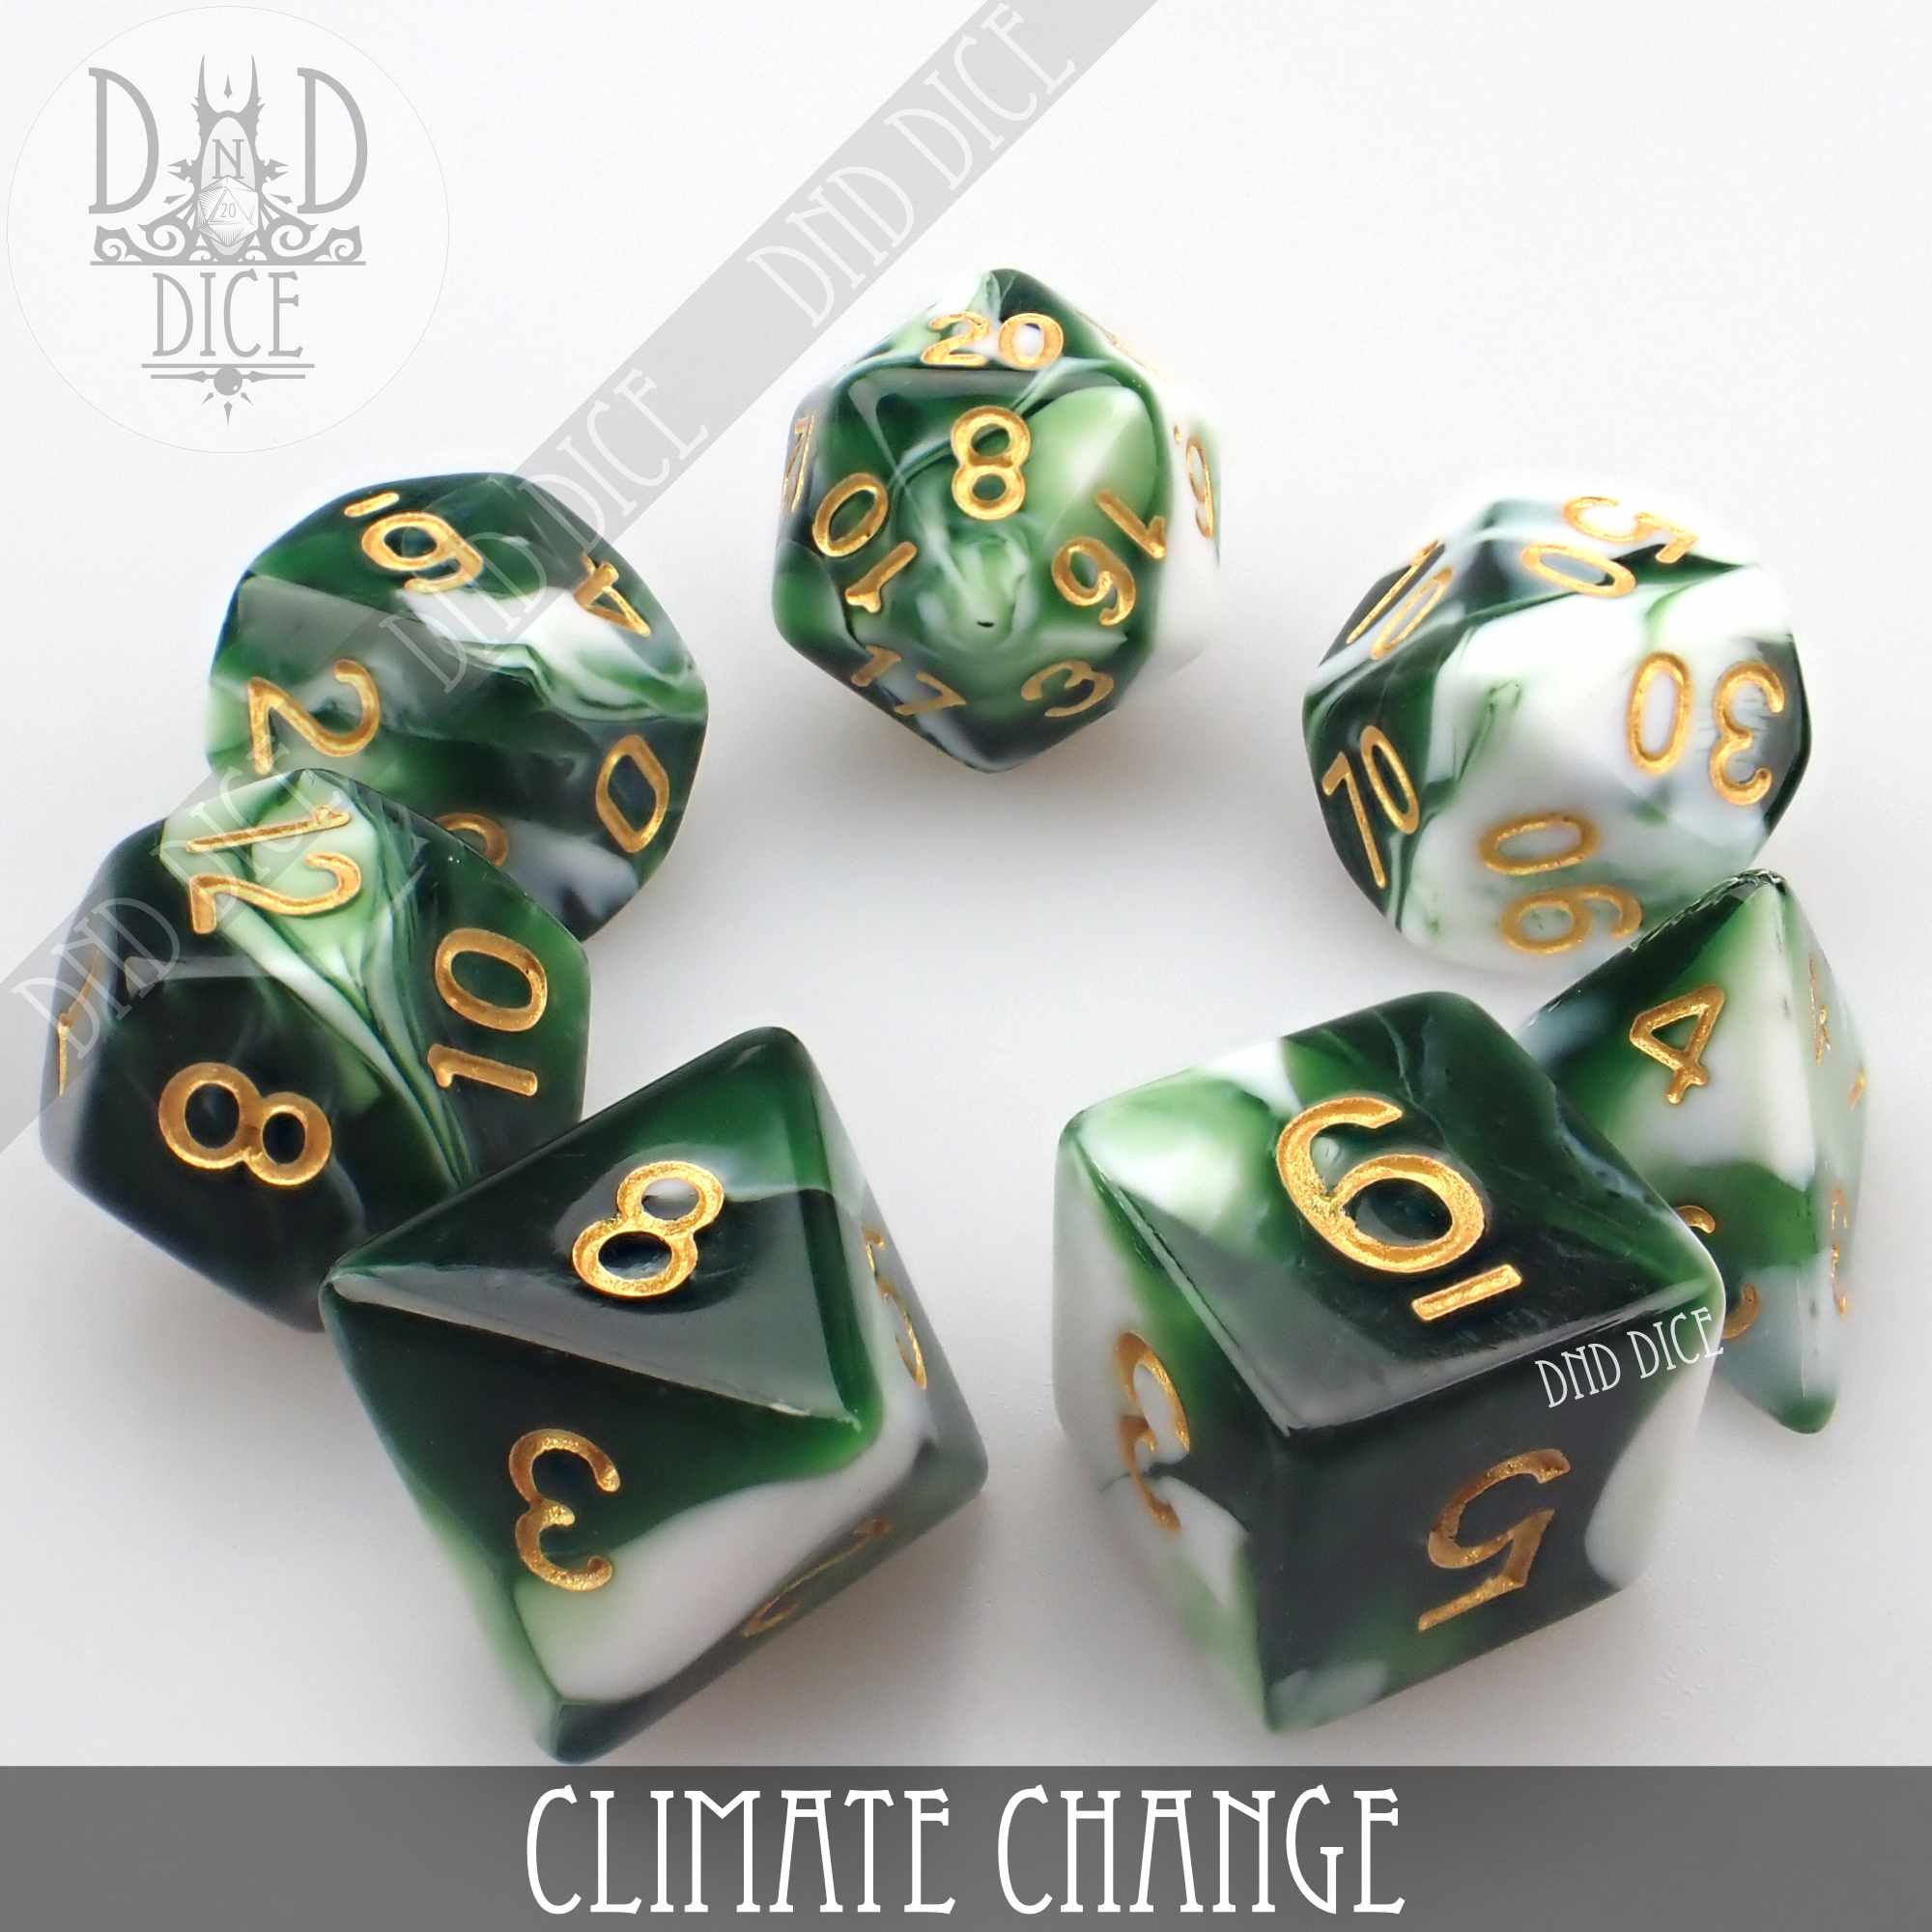 Climate Change 7 or 11 Dice Set